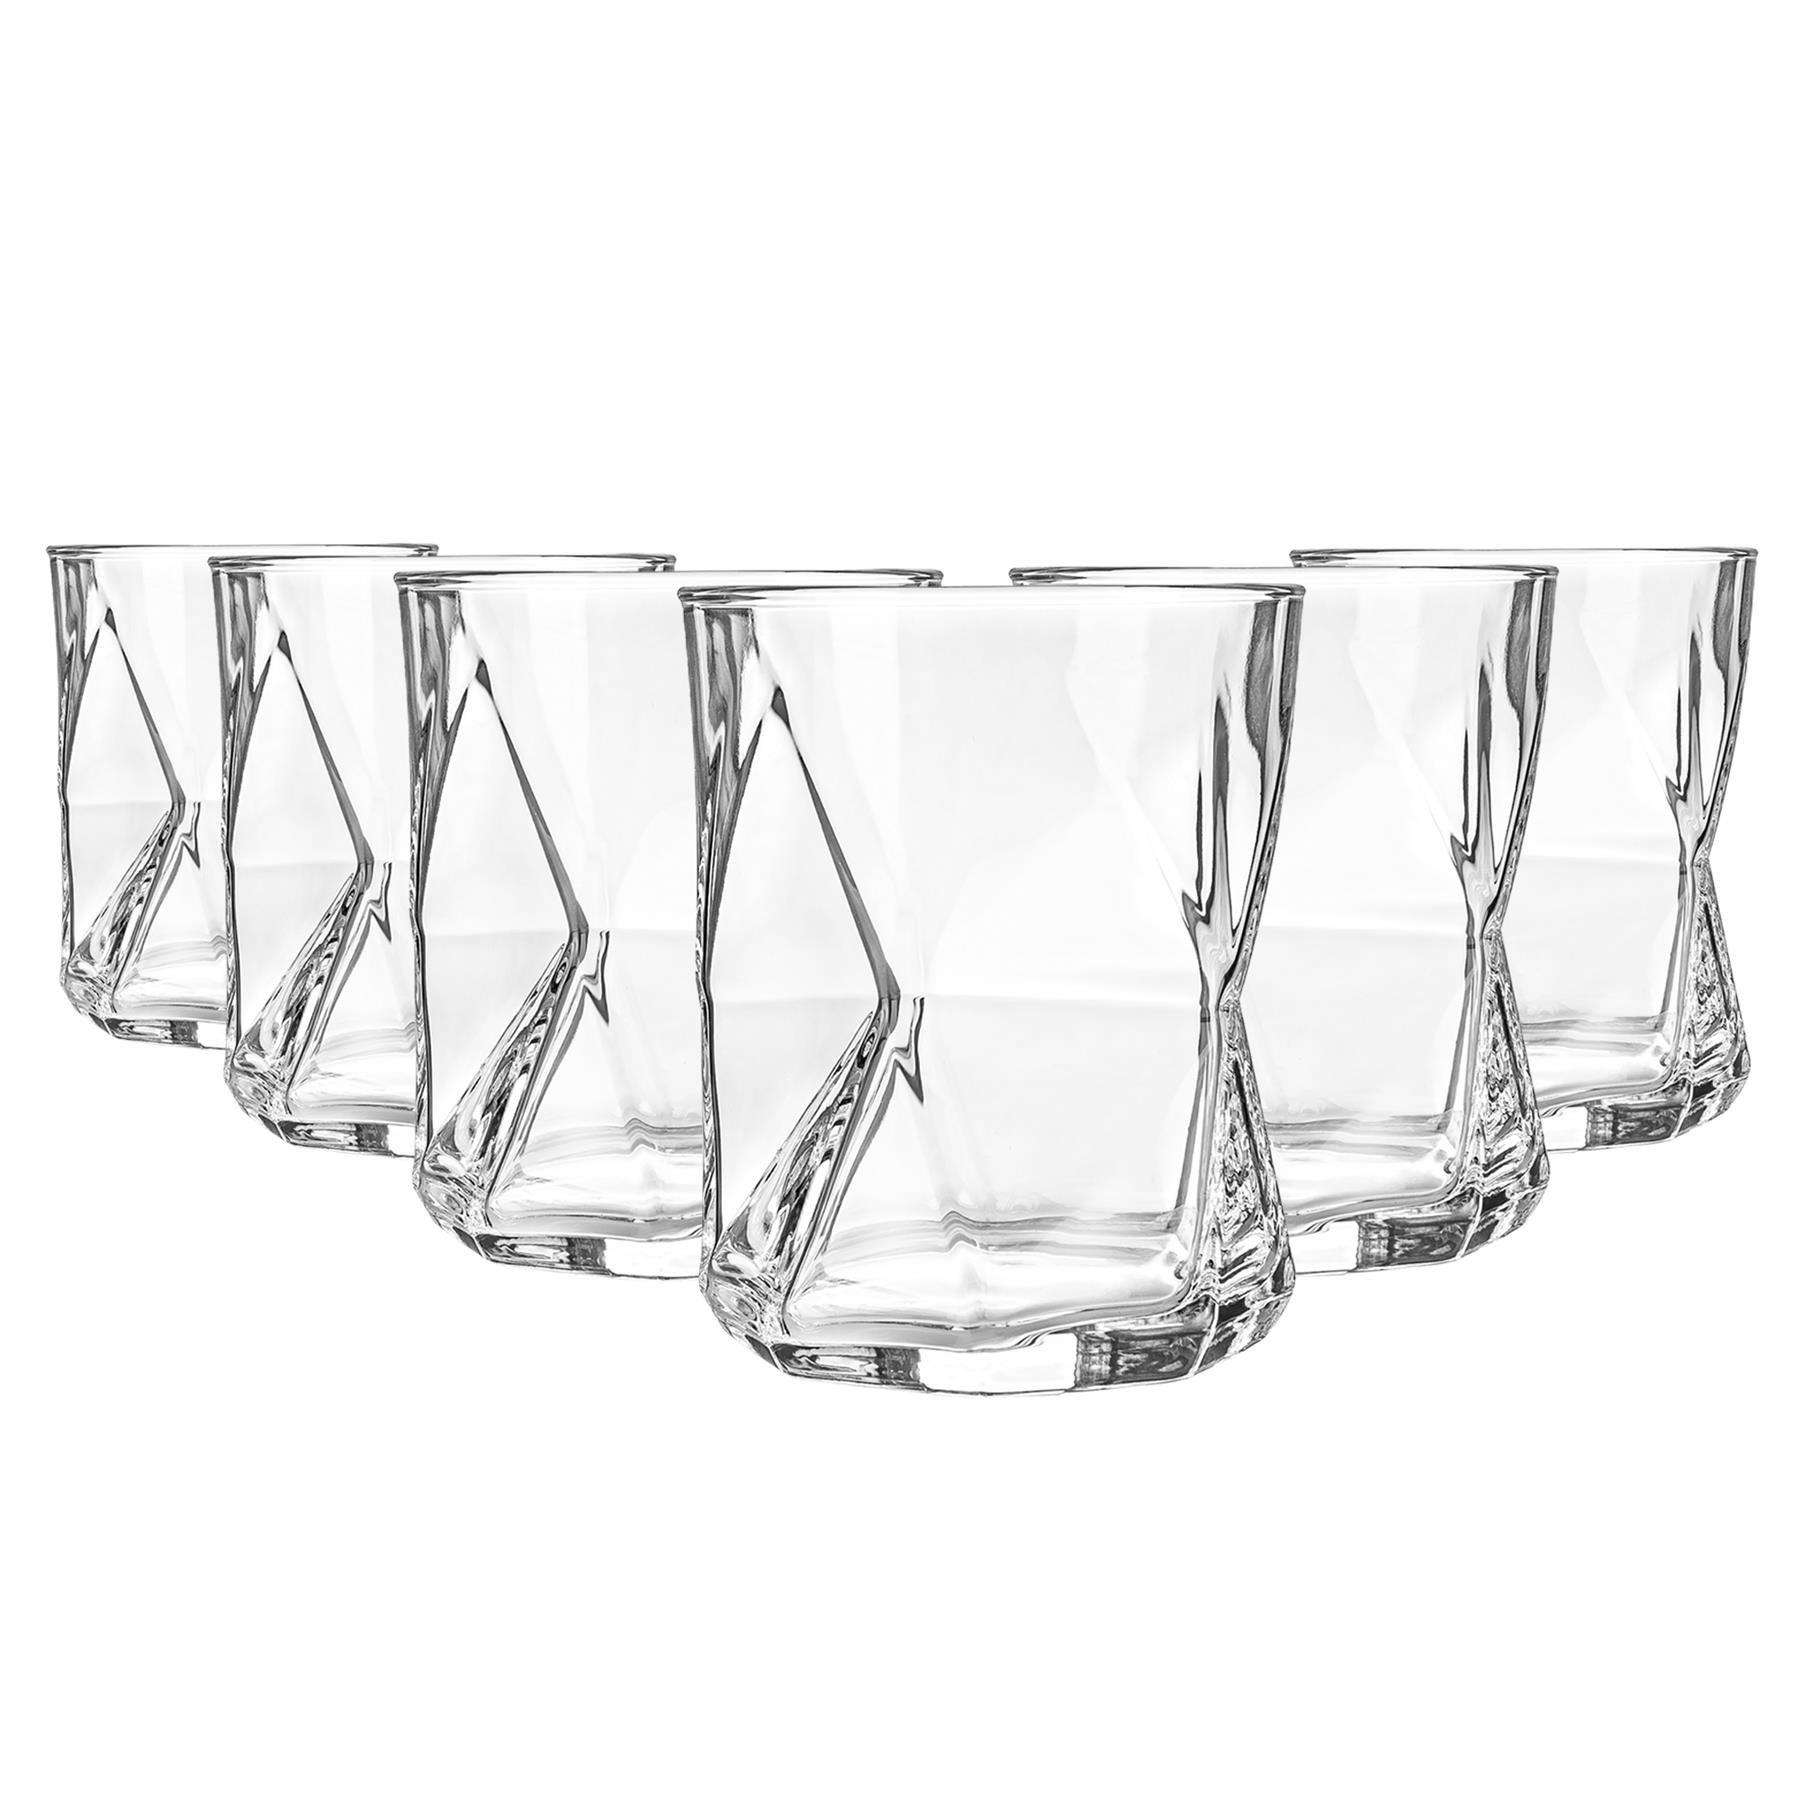 Photos - Glass Bormioli Rocco Cassiopea Double Whisky Glasses - 410ml - Clear - Pack of 24 